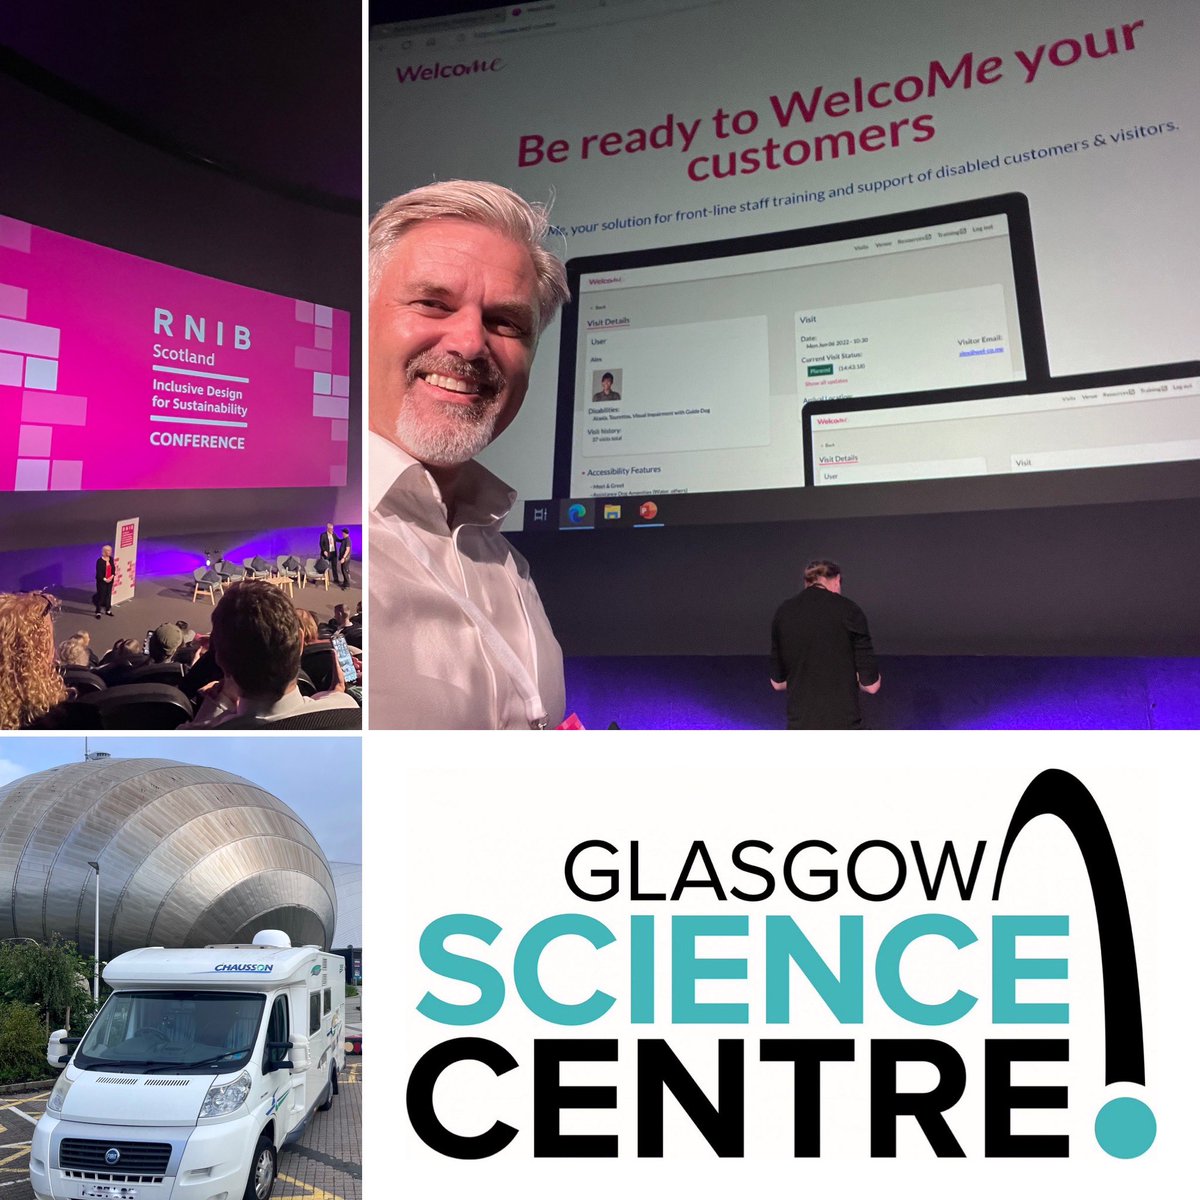 Travelling with my home on my back gives me amazing opportunities to attend the most exciting events. Today I’m super proud to present @WelcoMe_CS to delegates @RNIB #InclusiveDesign conference at a super WelcoMe venue, Glasgow Science Centre @gsc1. #AllWelcoMeNow with #Tech4Good